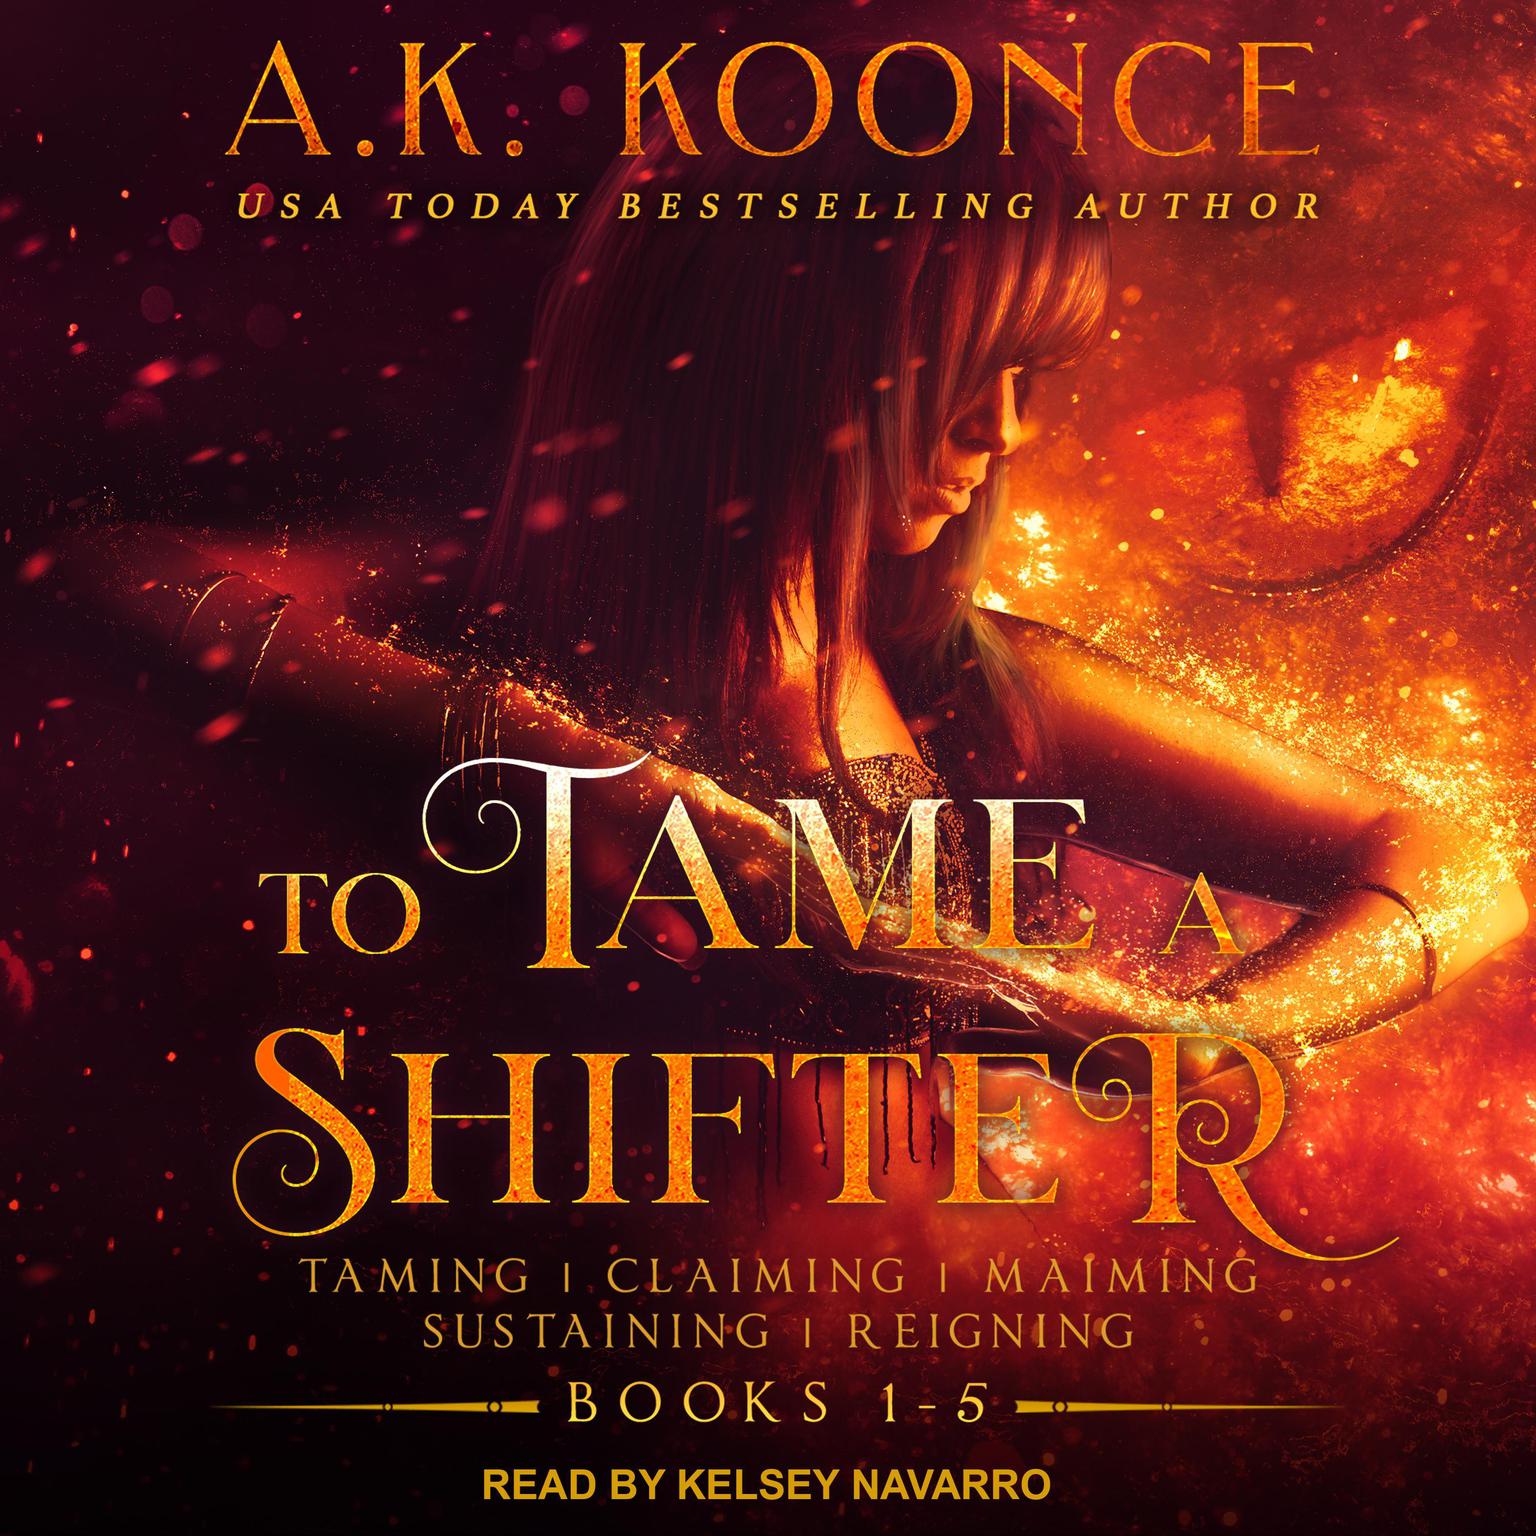 To Tame A Shifter Complete Box Set: Books 1-5 Audiobook, by A.K. Koonce